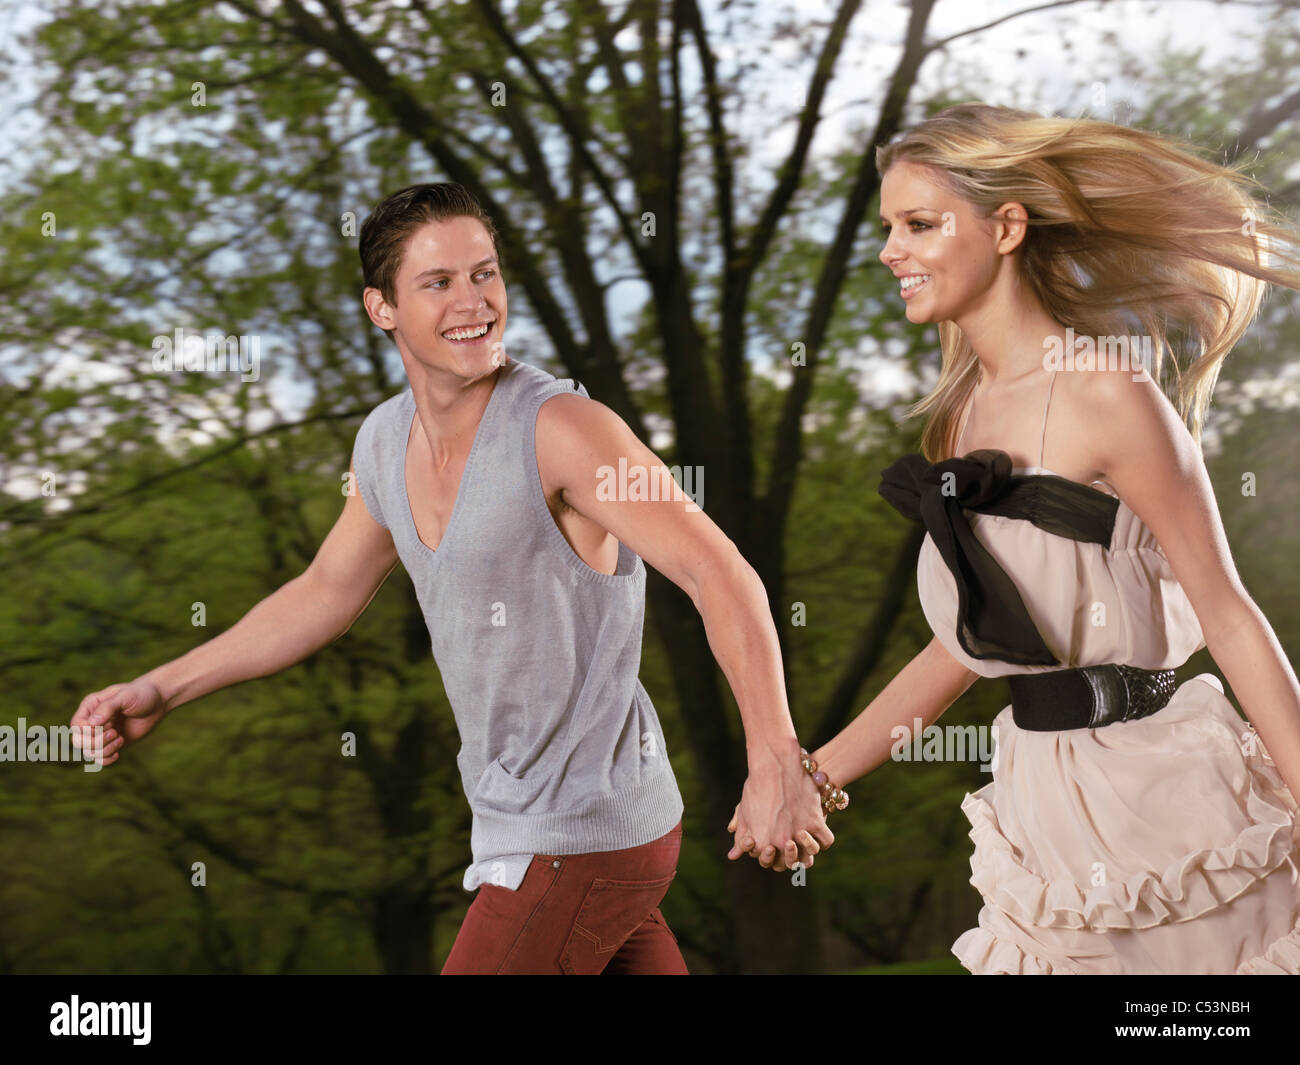 License available at MaximImages.com - Young happy romantic couple running together holding their hands Stock Photo